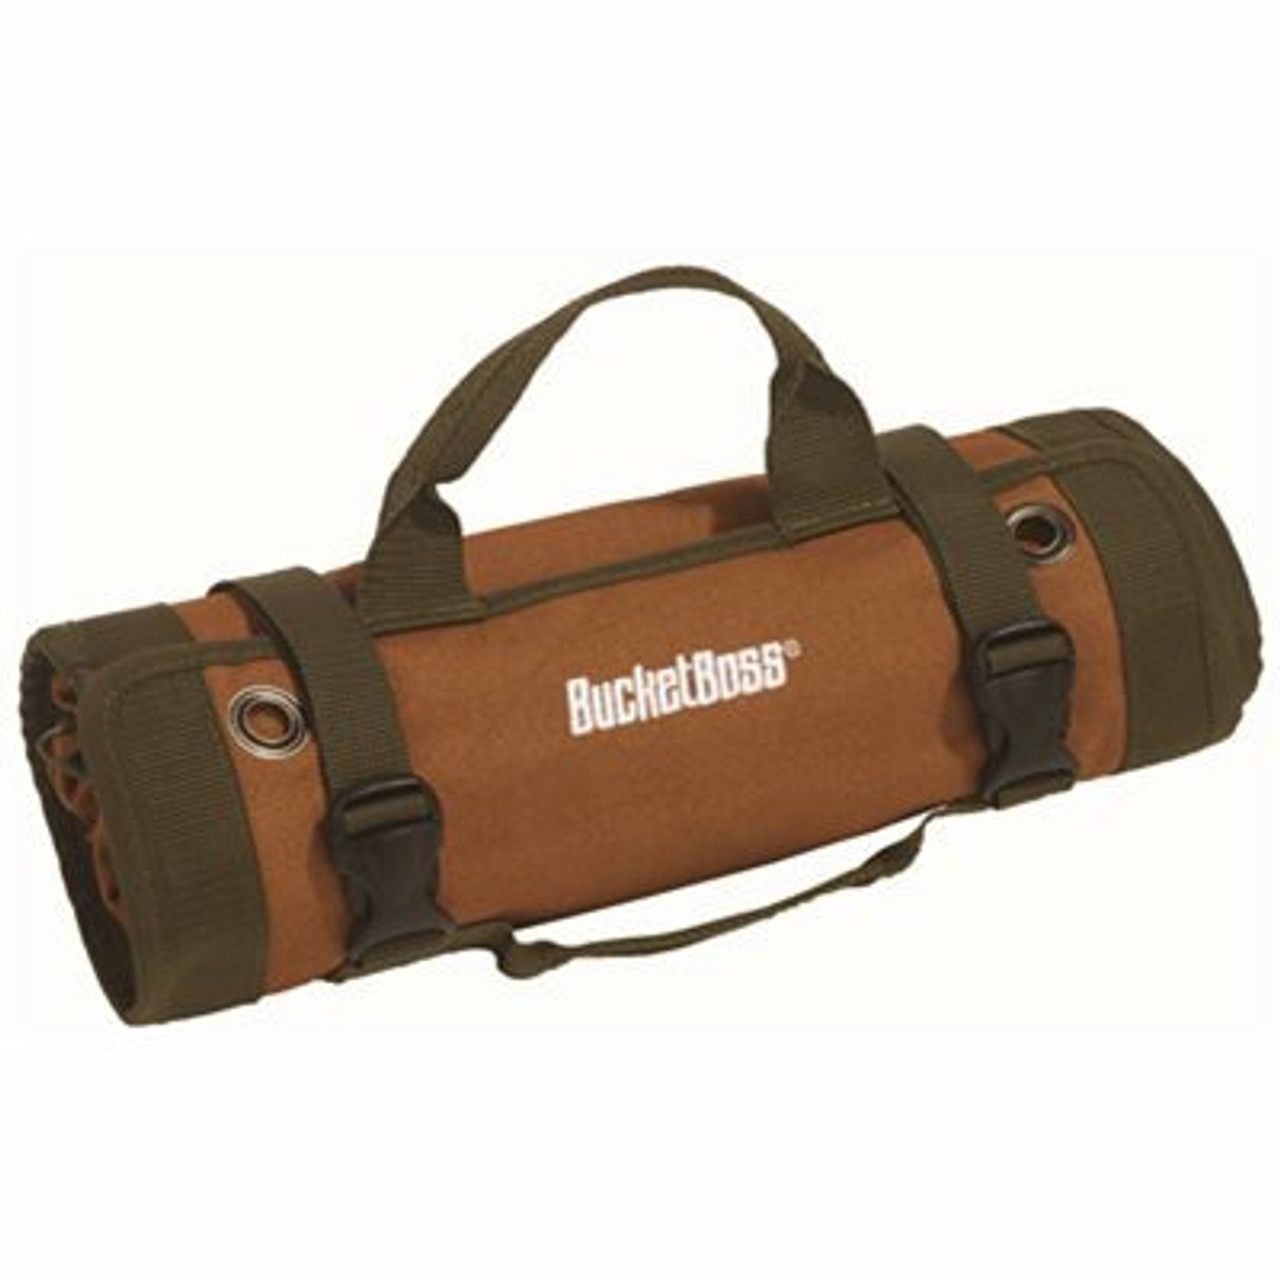 Bucket Boss 27 In. 6 Zippered Pockets Super Tool Roll In Brown